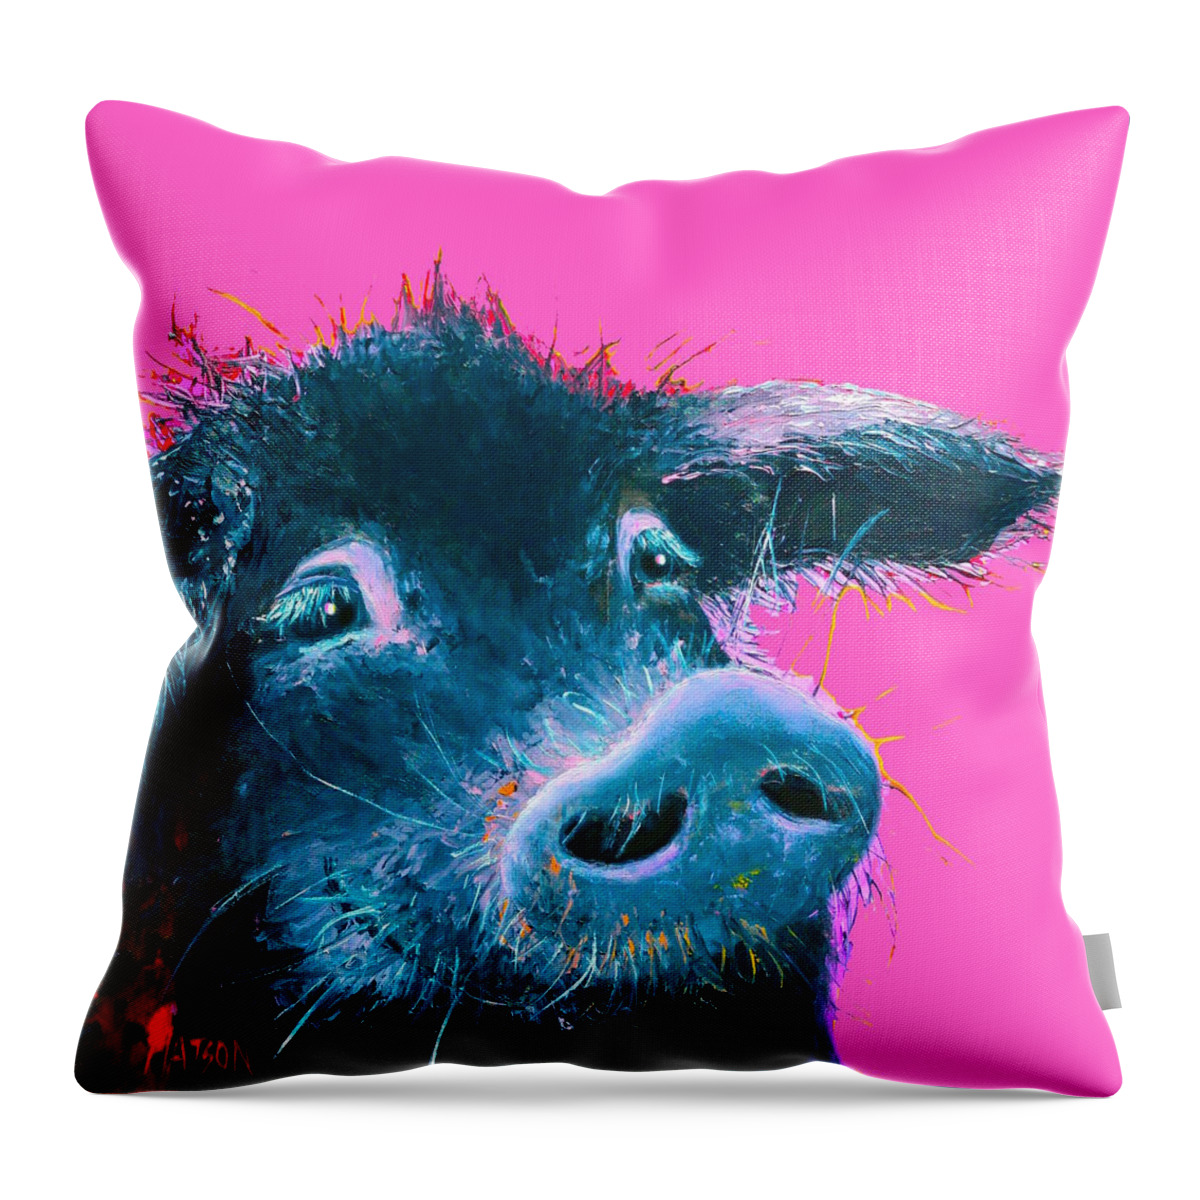 Pig Throw Pillow featuring the painting Black Pig painting on pink background by Jan Matson